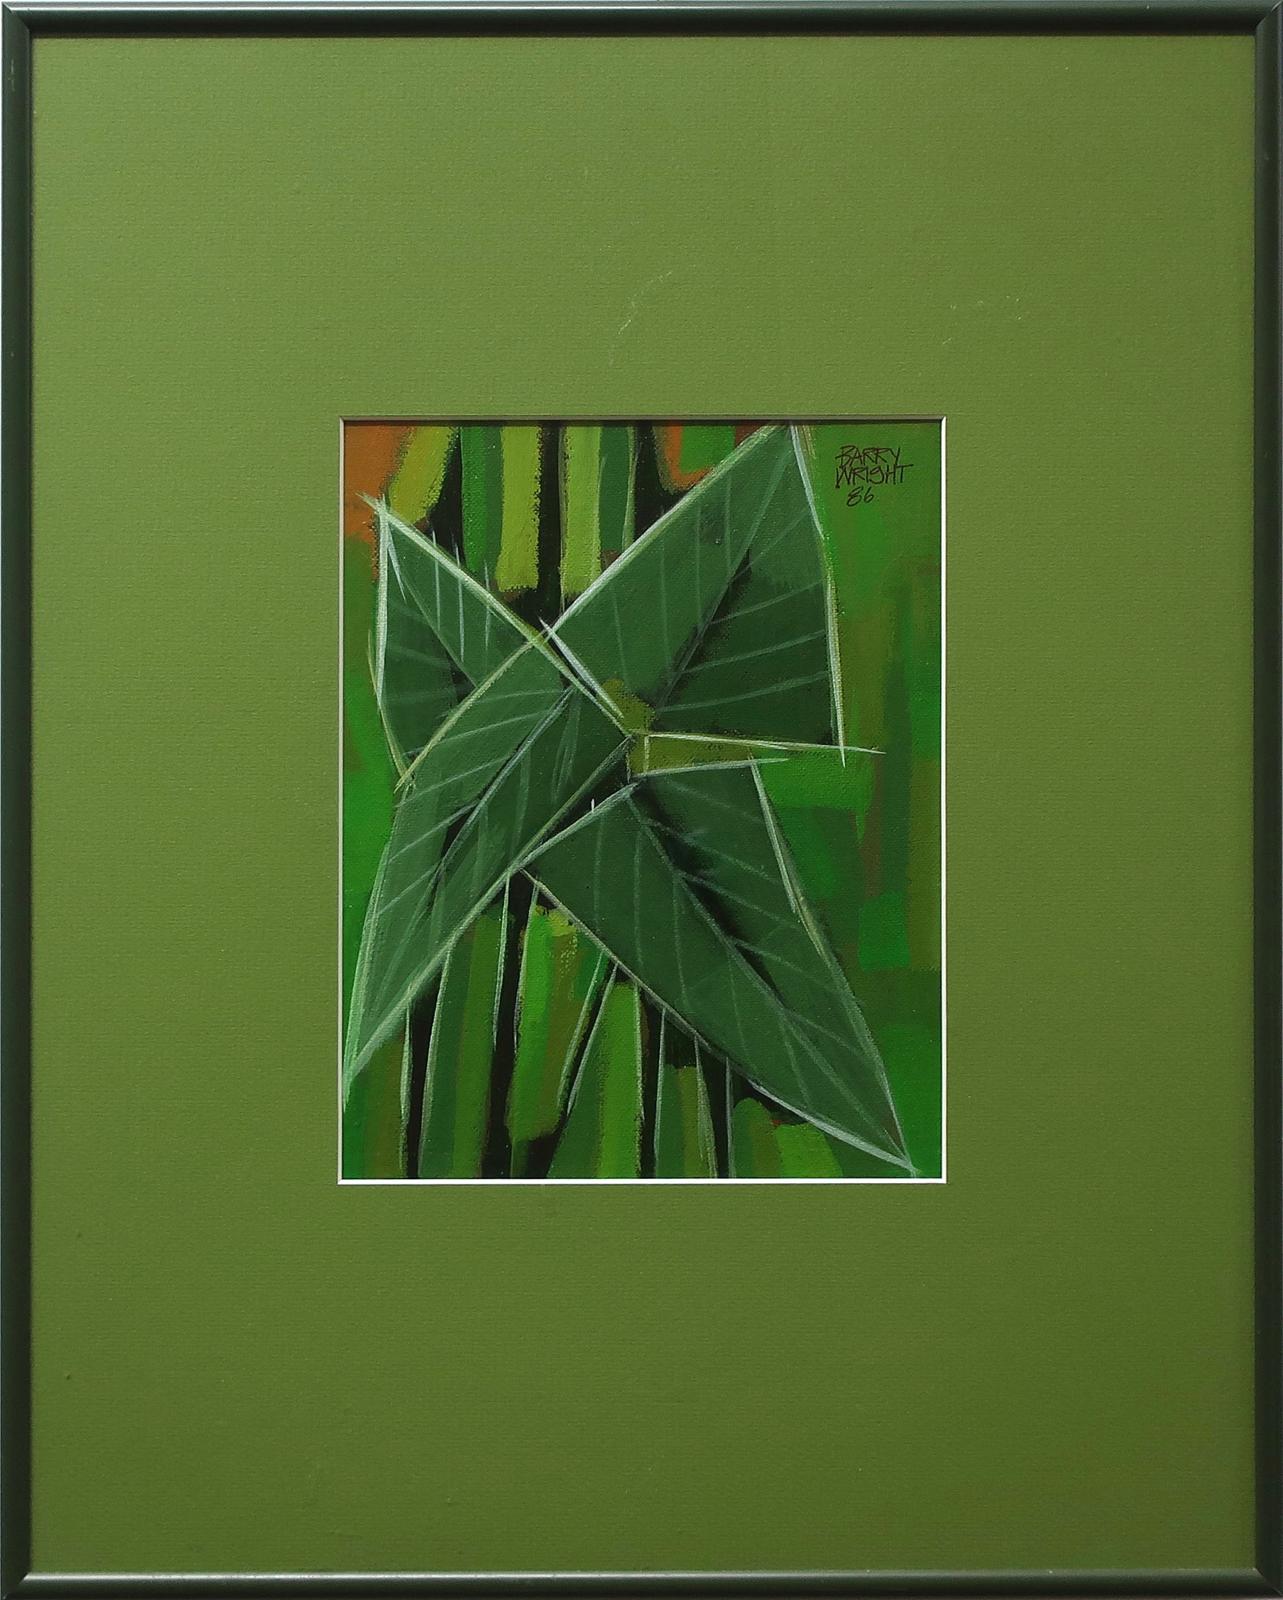 Barry Wright - Untitled (Green Leaves)